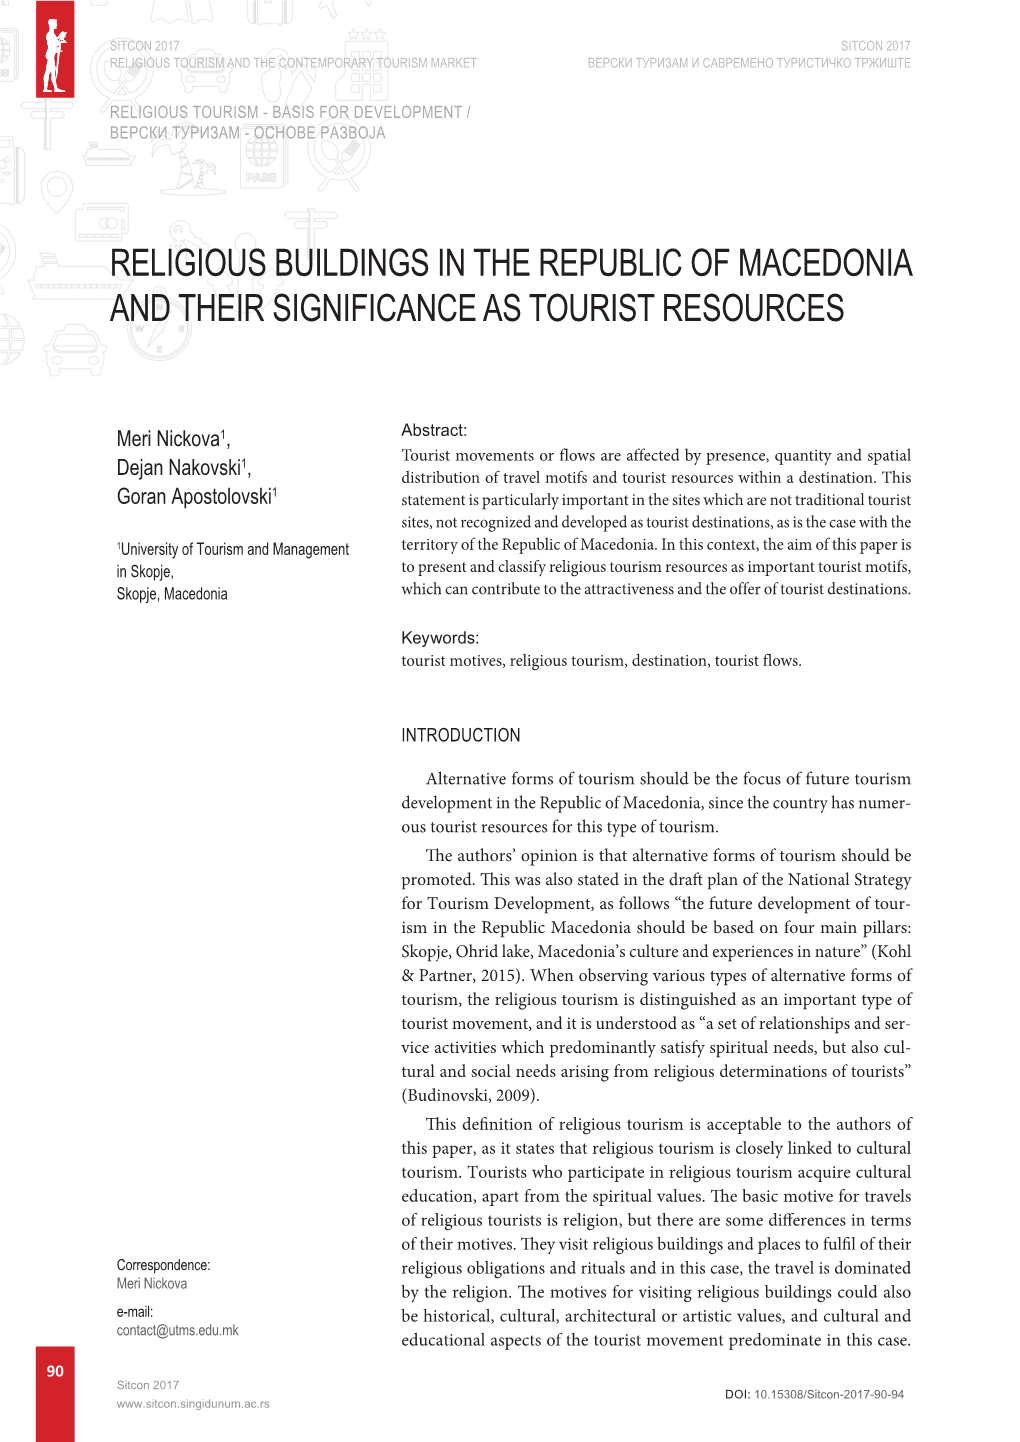 Religious Buildings in the Republic of Macedonia and Their Significance As Tourist Resources